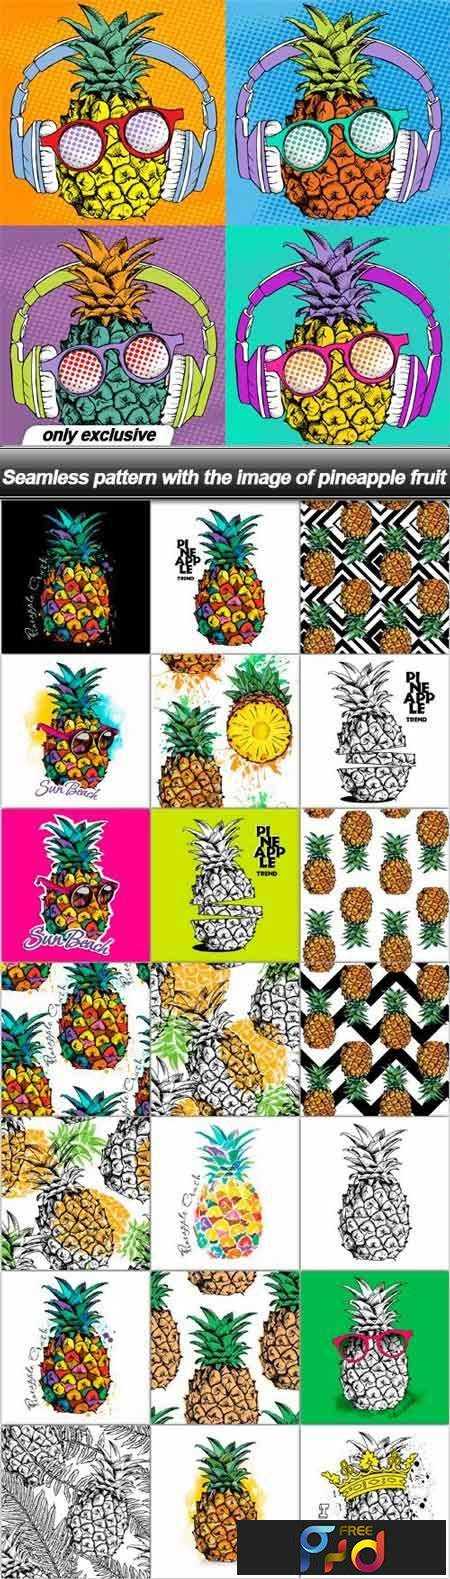 FreePsdVn.com_VECTOR_1701266_seamless_pattern_with_the_image_of_pineapple_fruit_38_eps